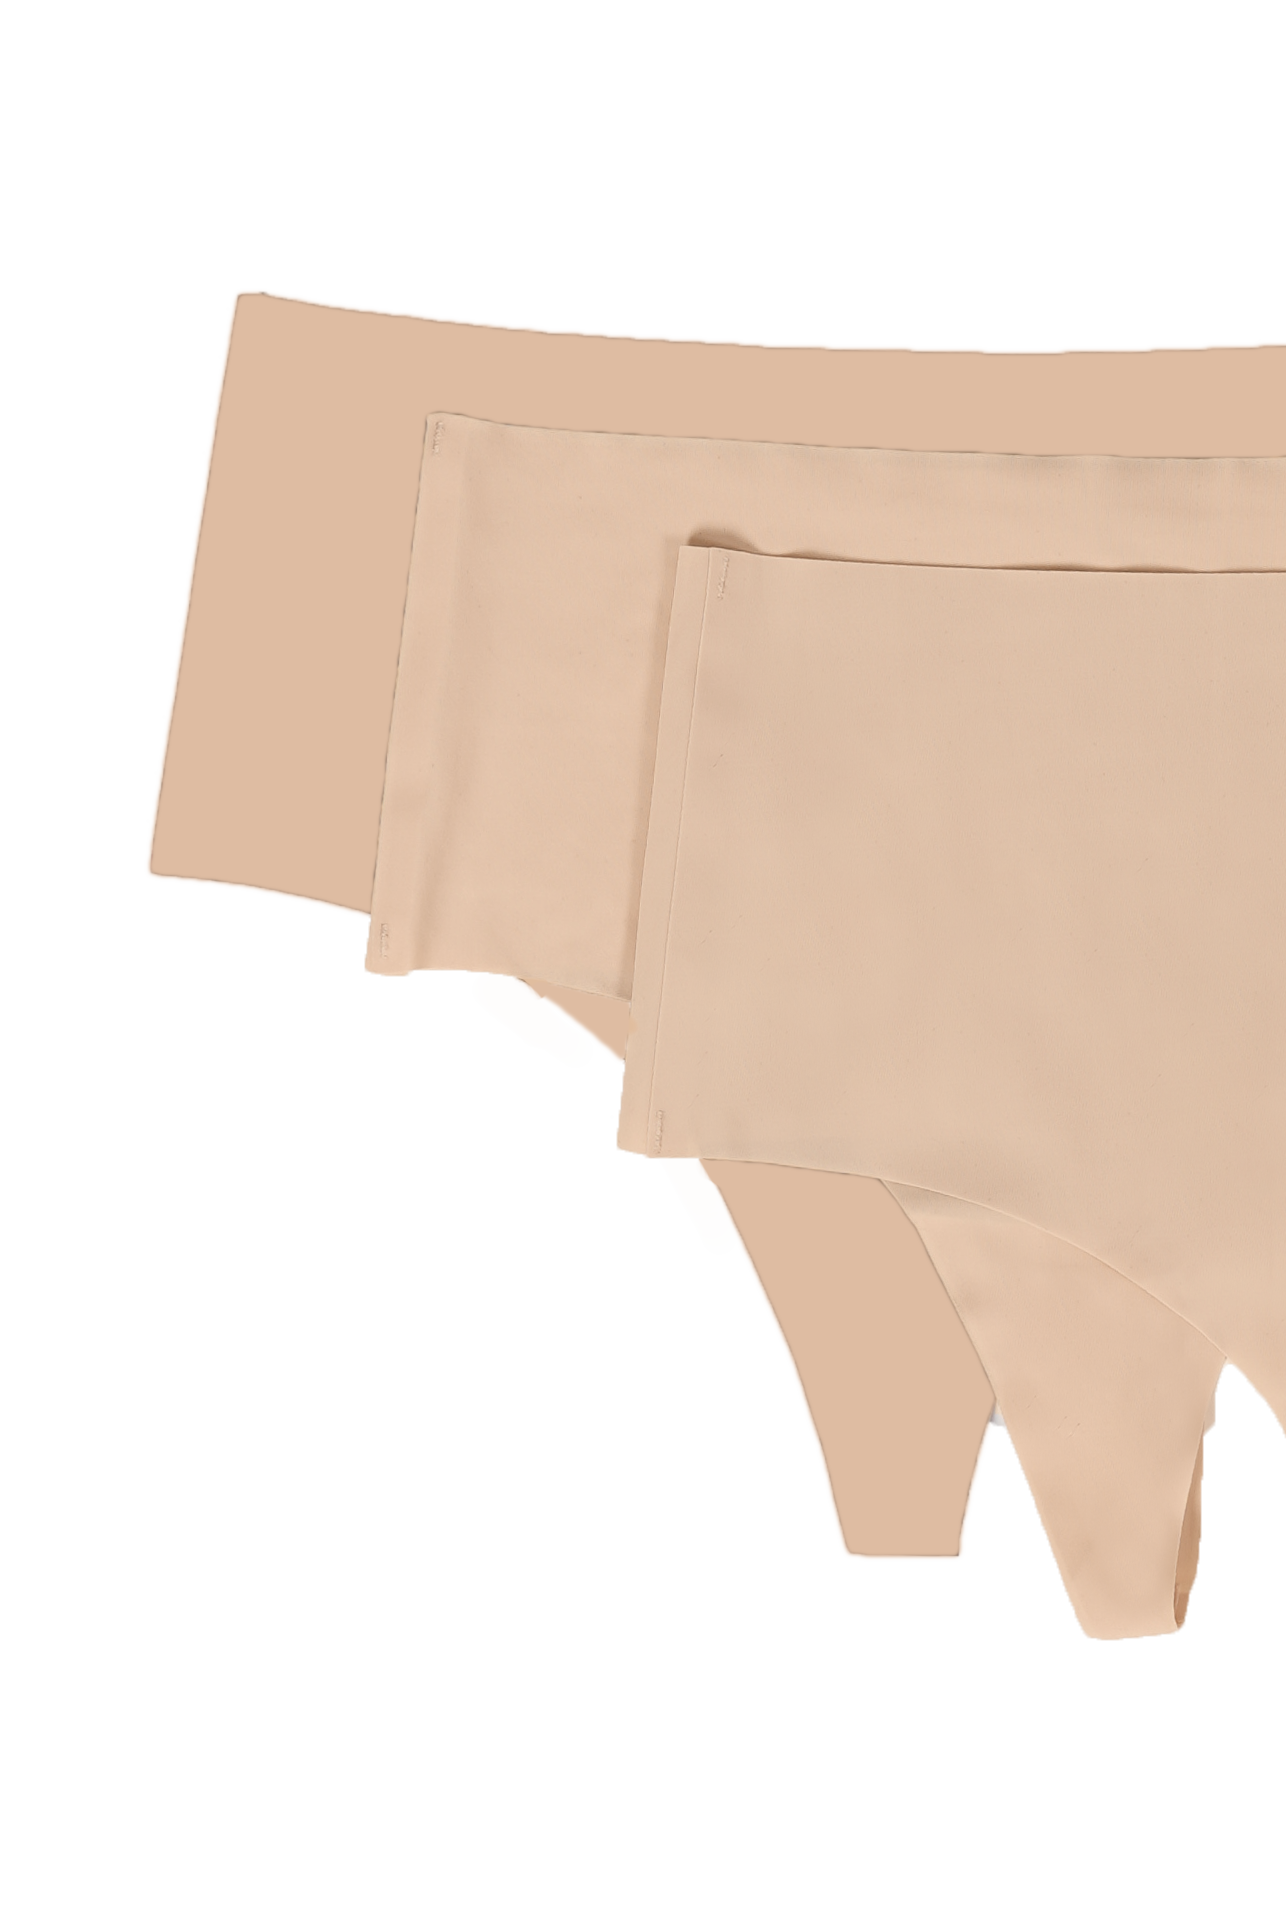 Invisible Seamless High-Rise Thong (3-Piece)